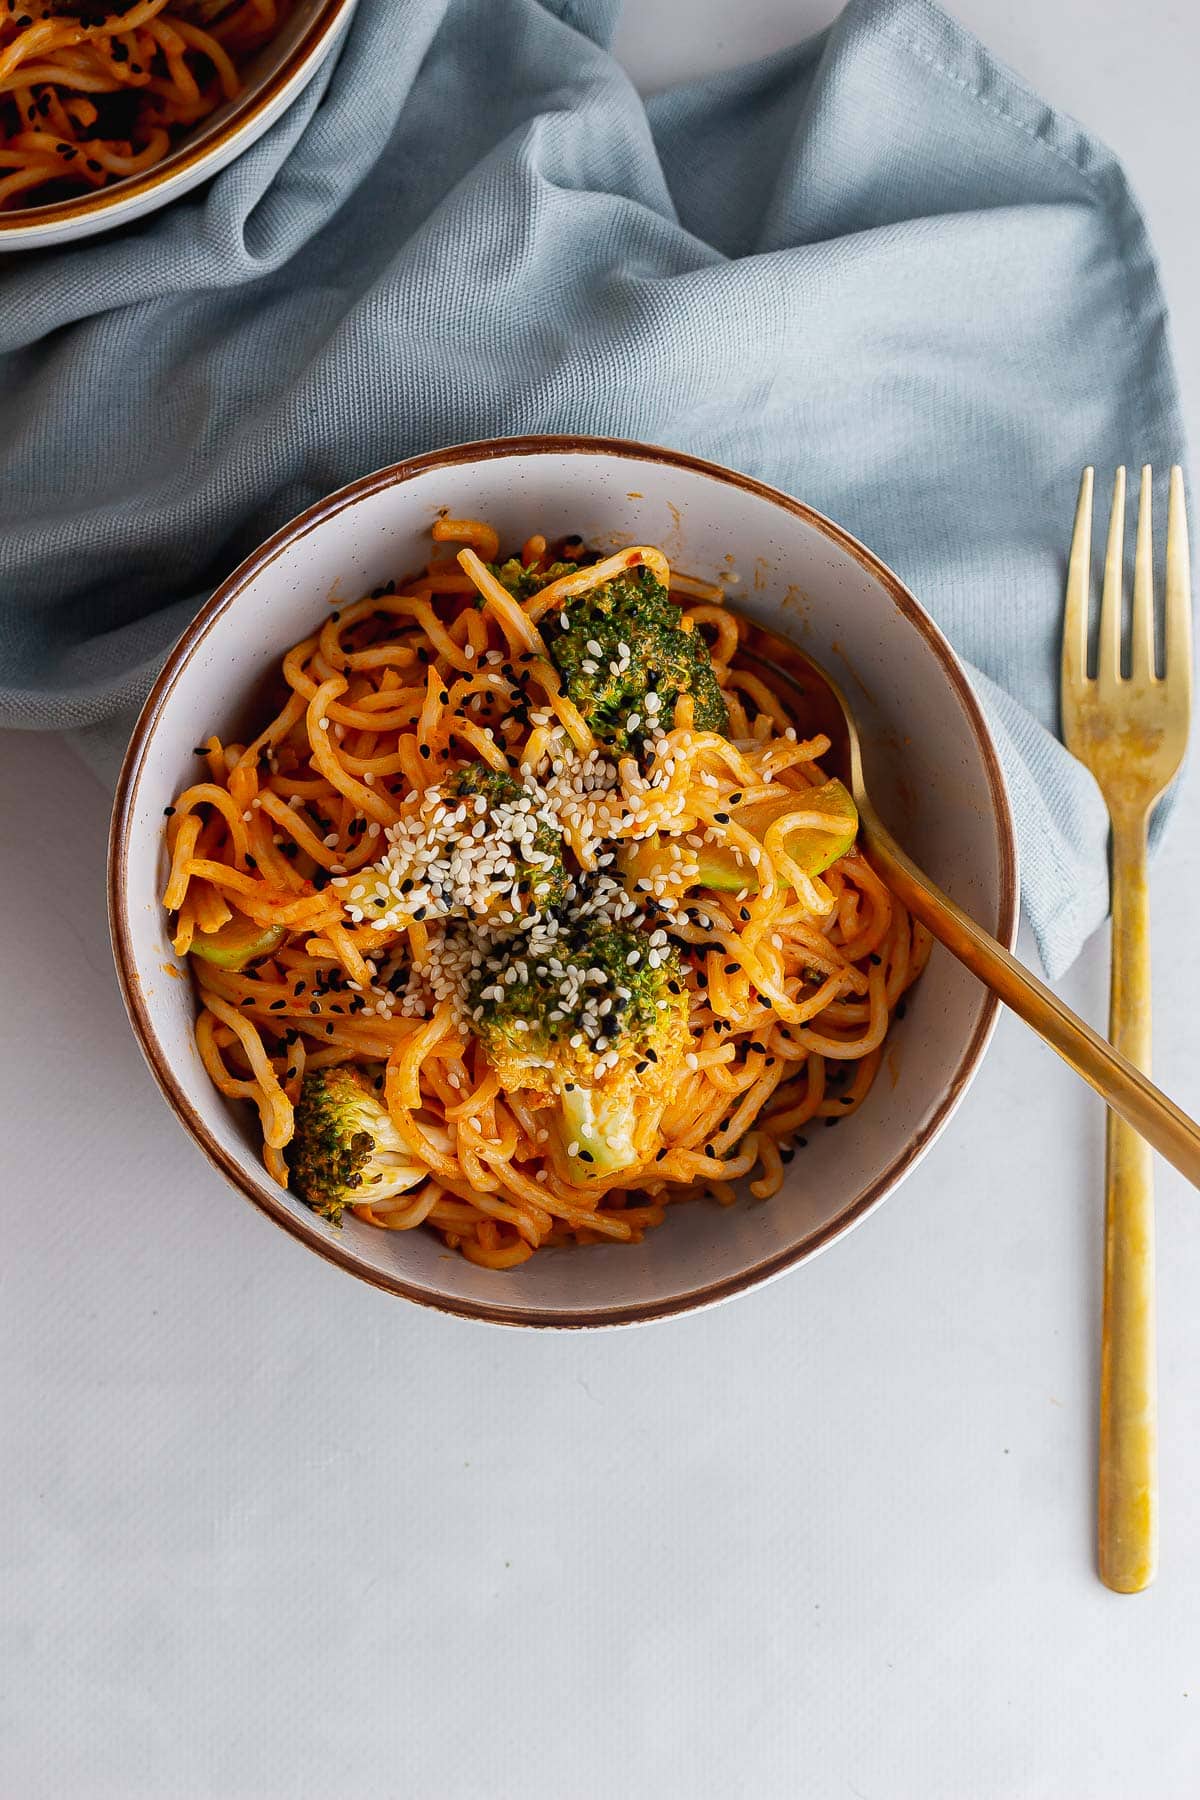 Spicy Noodles with Broccoli • The Cook Report